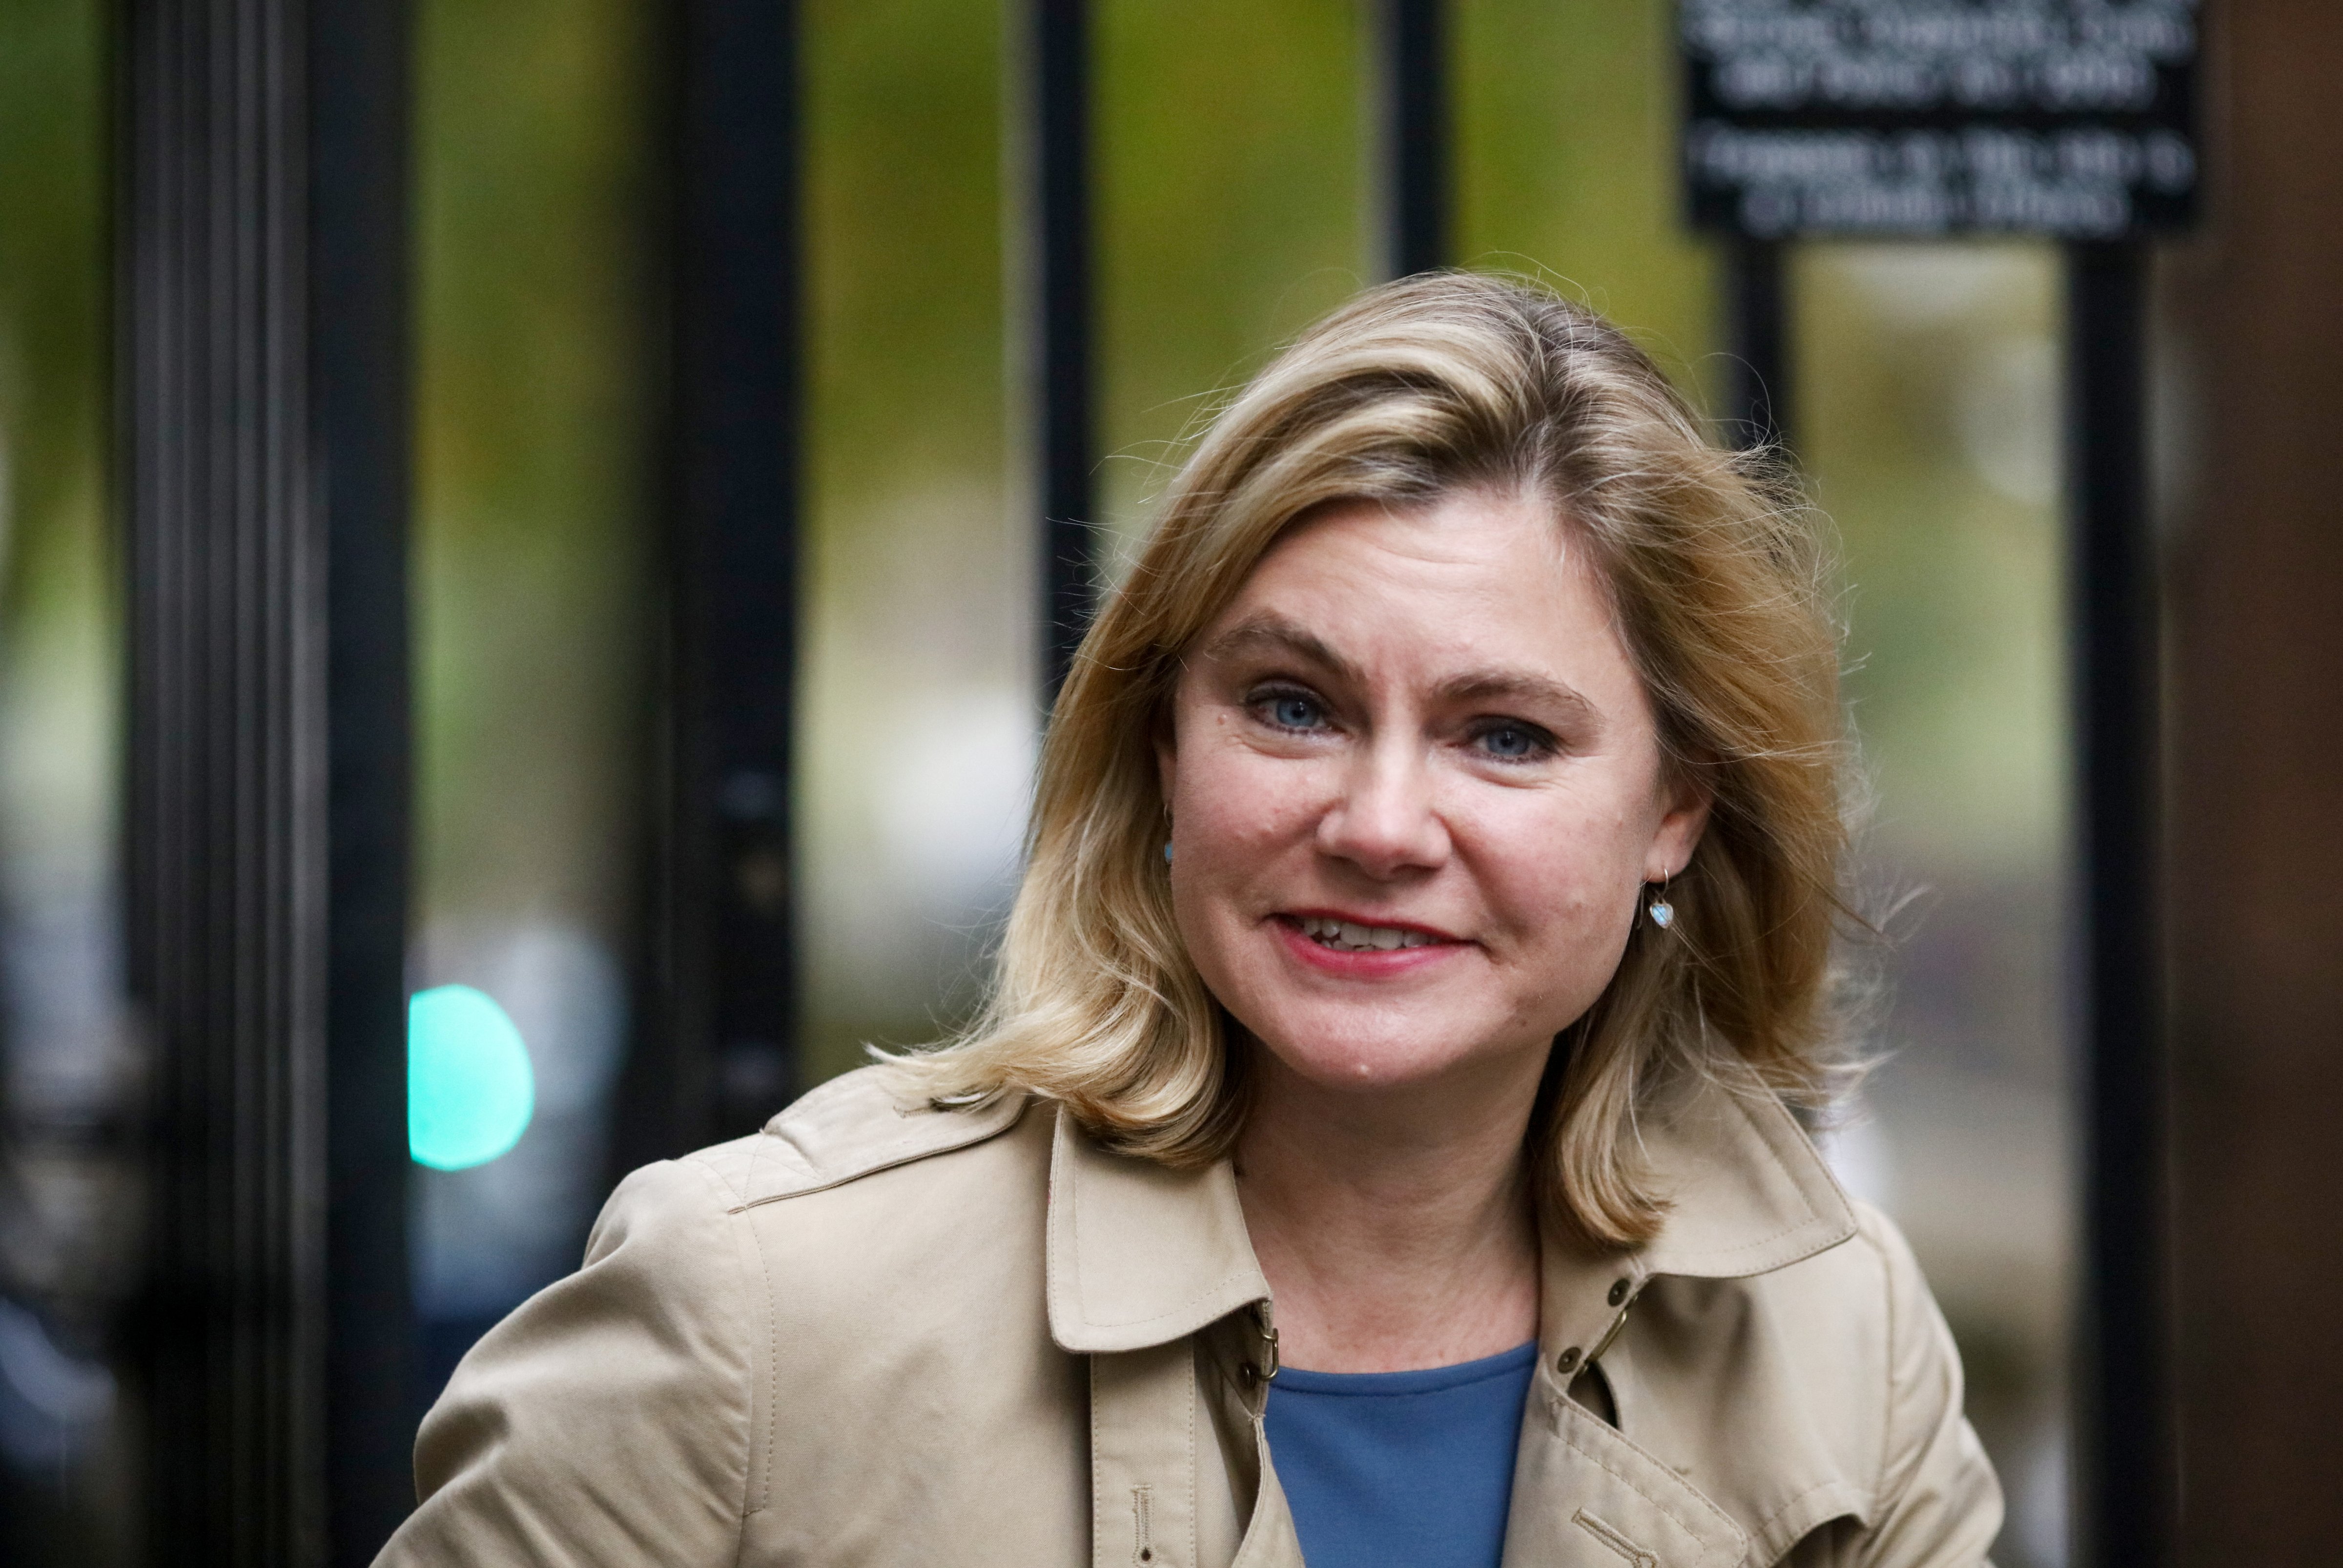 Justine Greening, U.K. education secretary, arrives to attend the weekly cabinet meeting at Downing Street in London, U.K., on Tuesday, Nov. 15, 2016. (Chris Ratcliffe—Bloomberg —Getty Images)